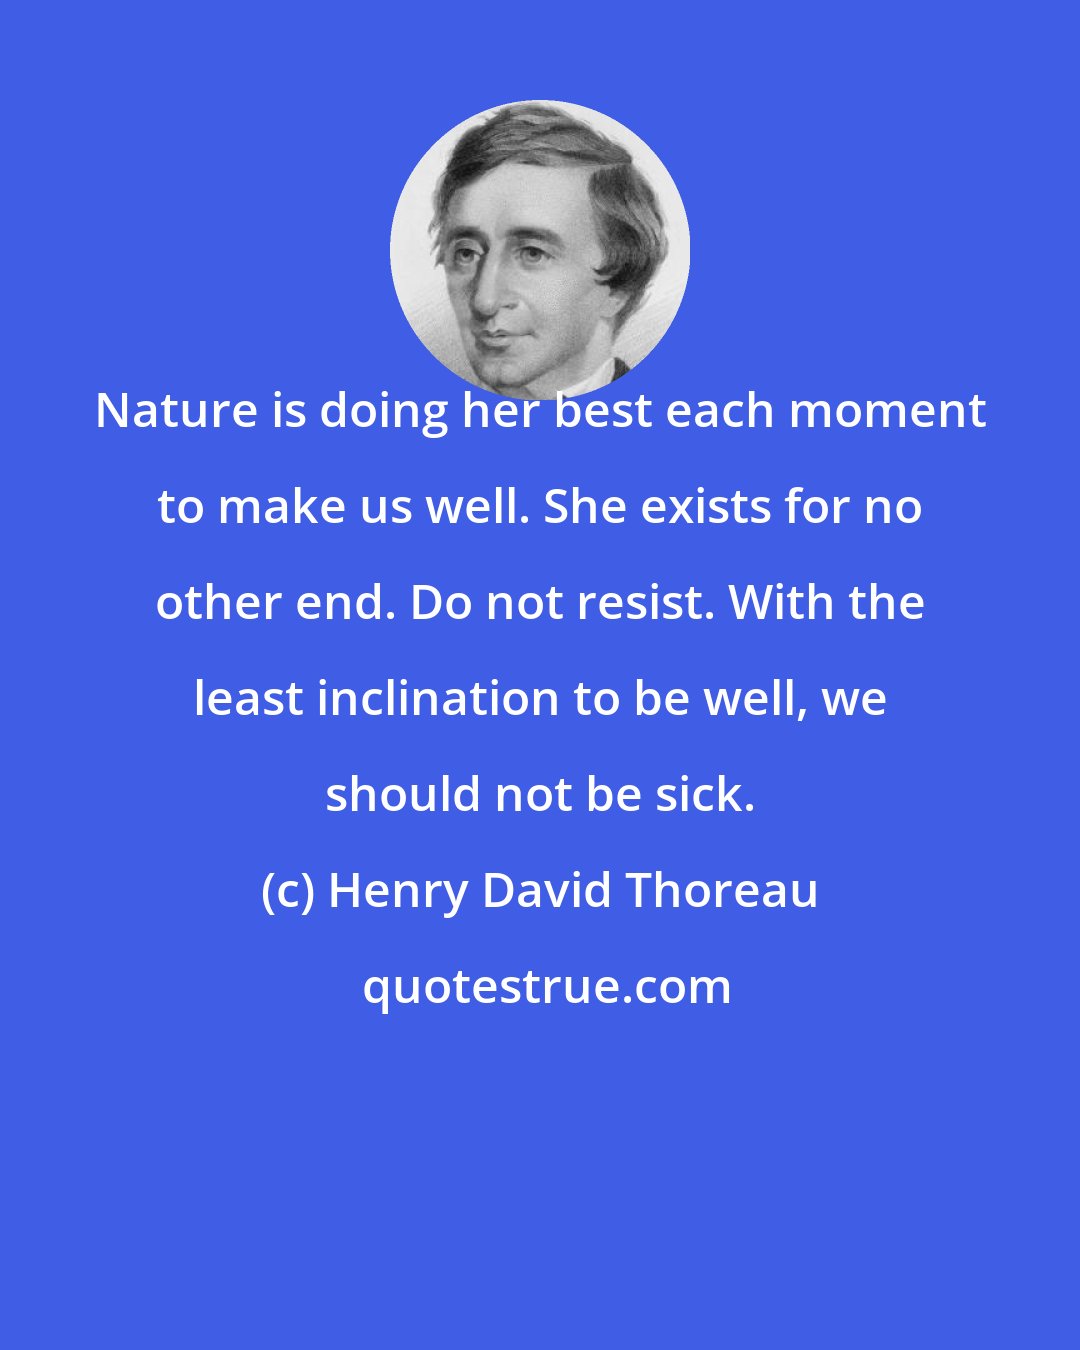 Henry David Thoreau: Nature is doing her best each moment to make us well. She exists for no other end. Do not resist. With the least inclination to be well, we should not be sick.